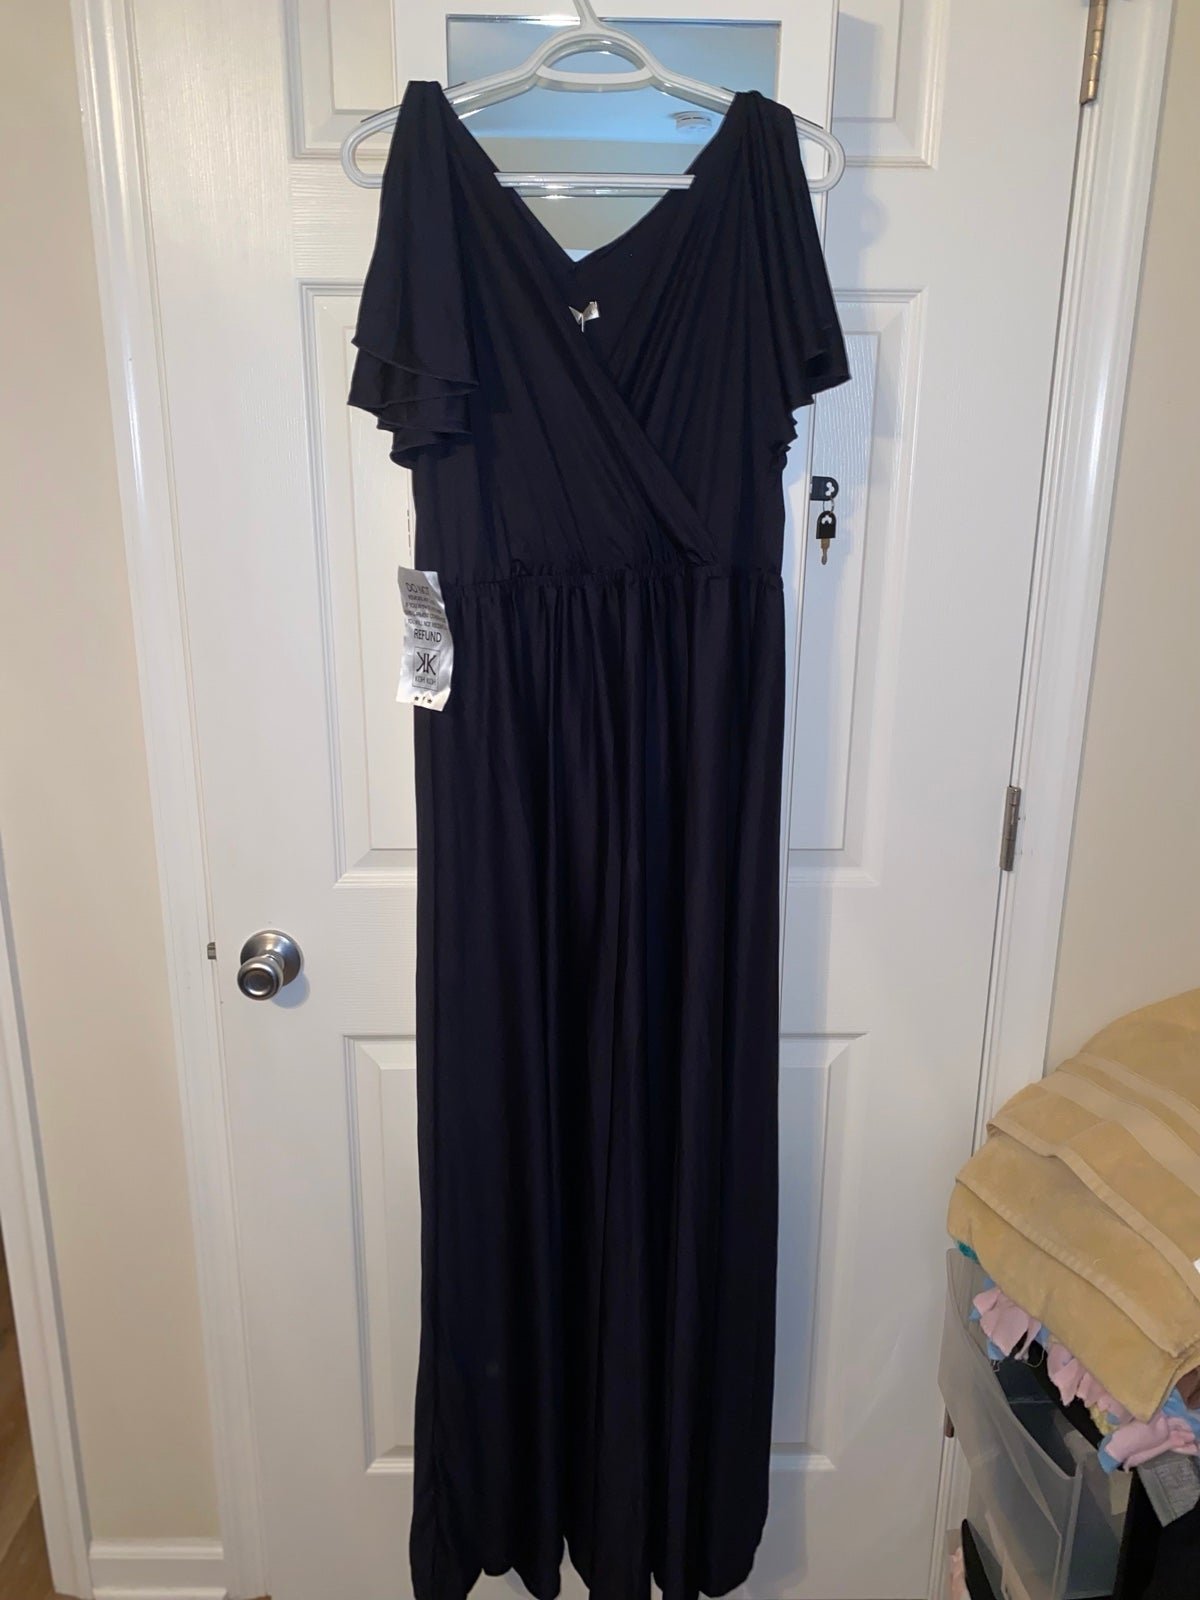 NWT NY Womens Collection Dress dfCrb9zE3